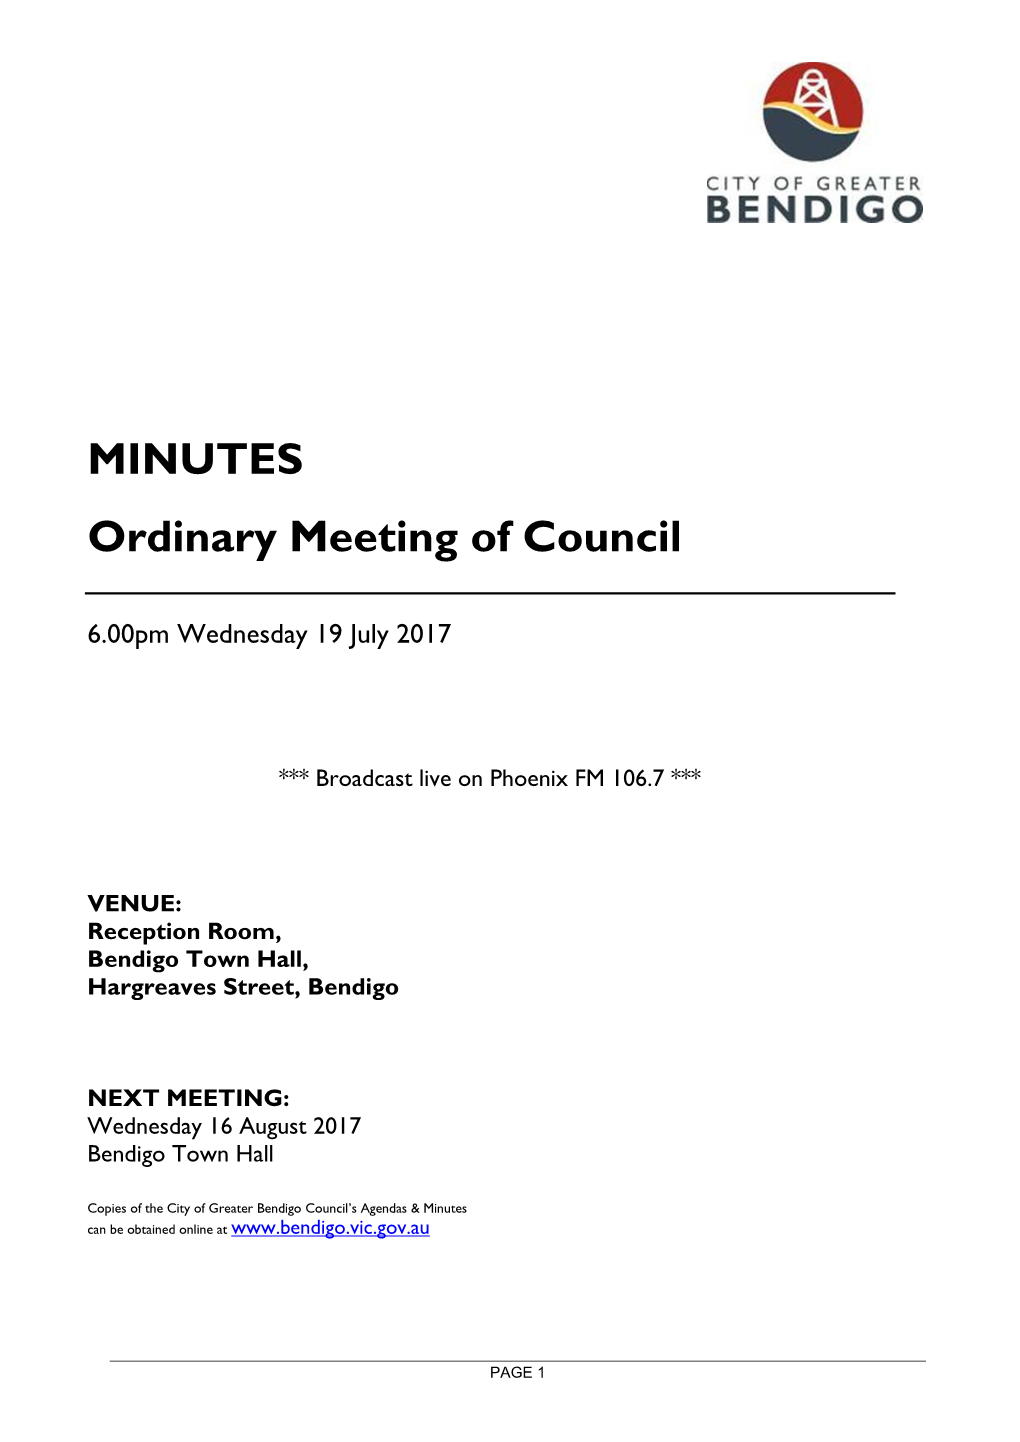 MINUTES Ordinary Meeting of Council